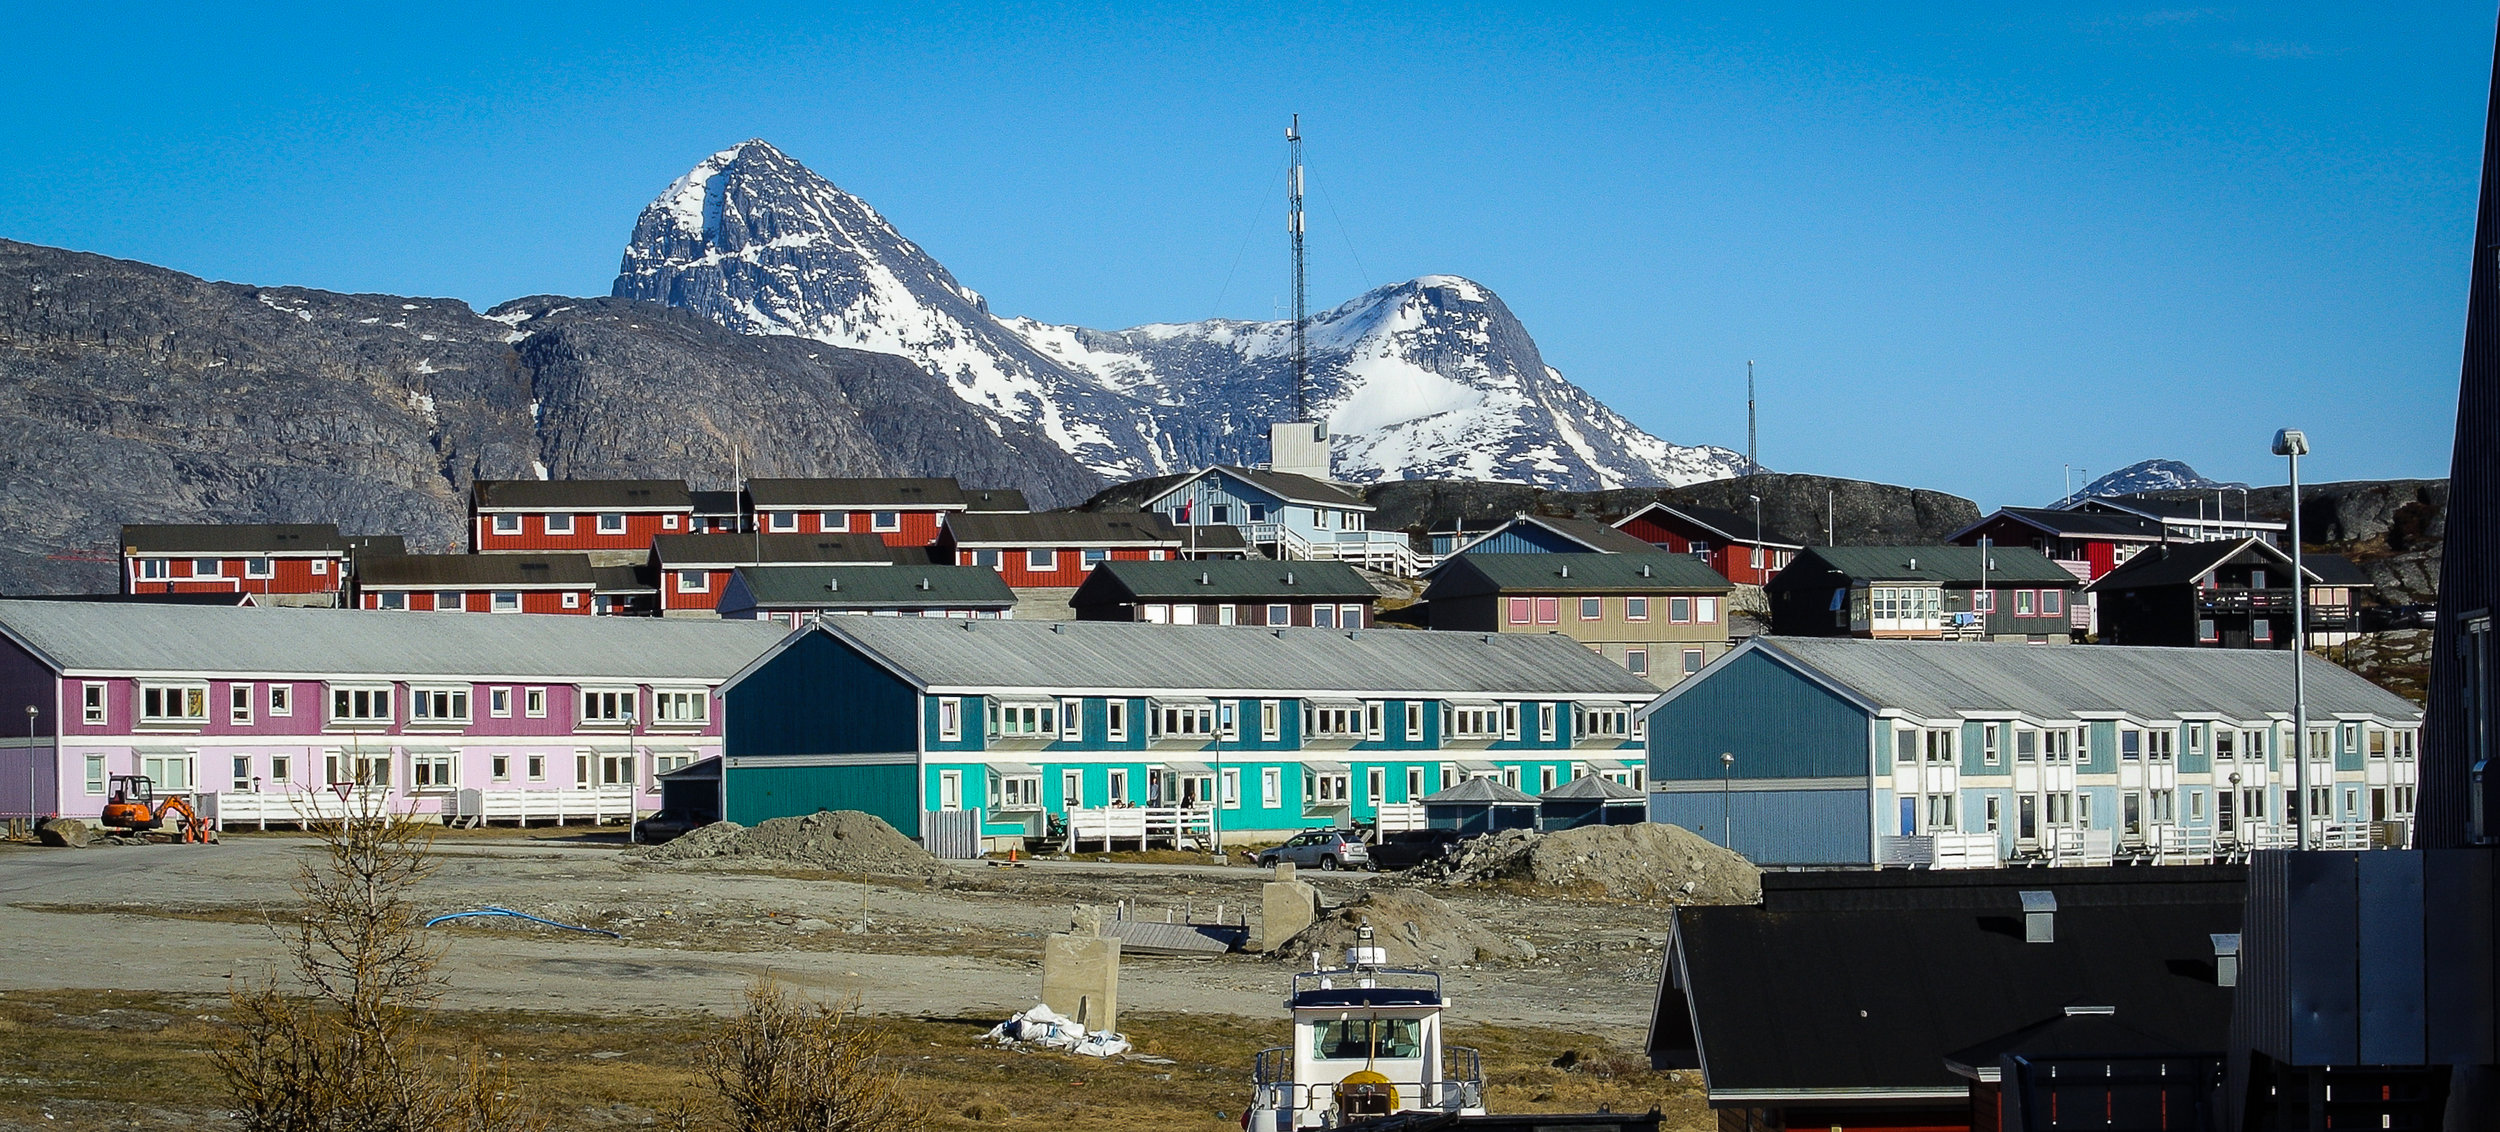 Nuuk. Greenland´s tradition of timber as the main house building material may provide opportunities for the lumber industry in Maine. JONAA@Vilborg Einarsdottir